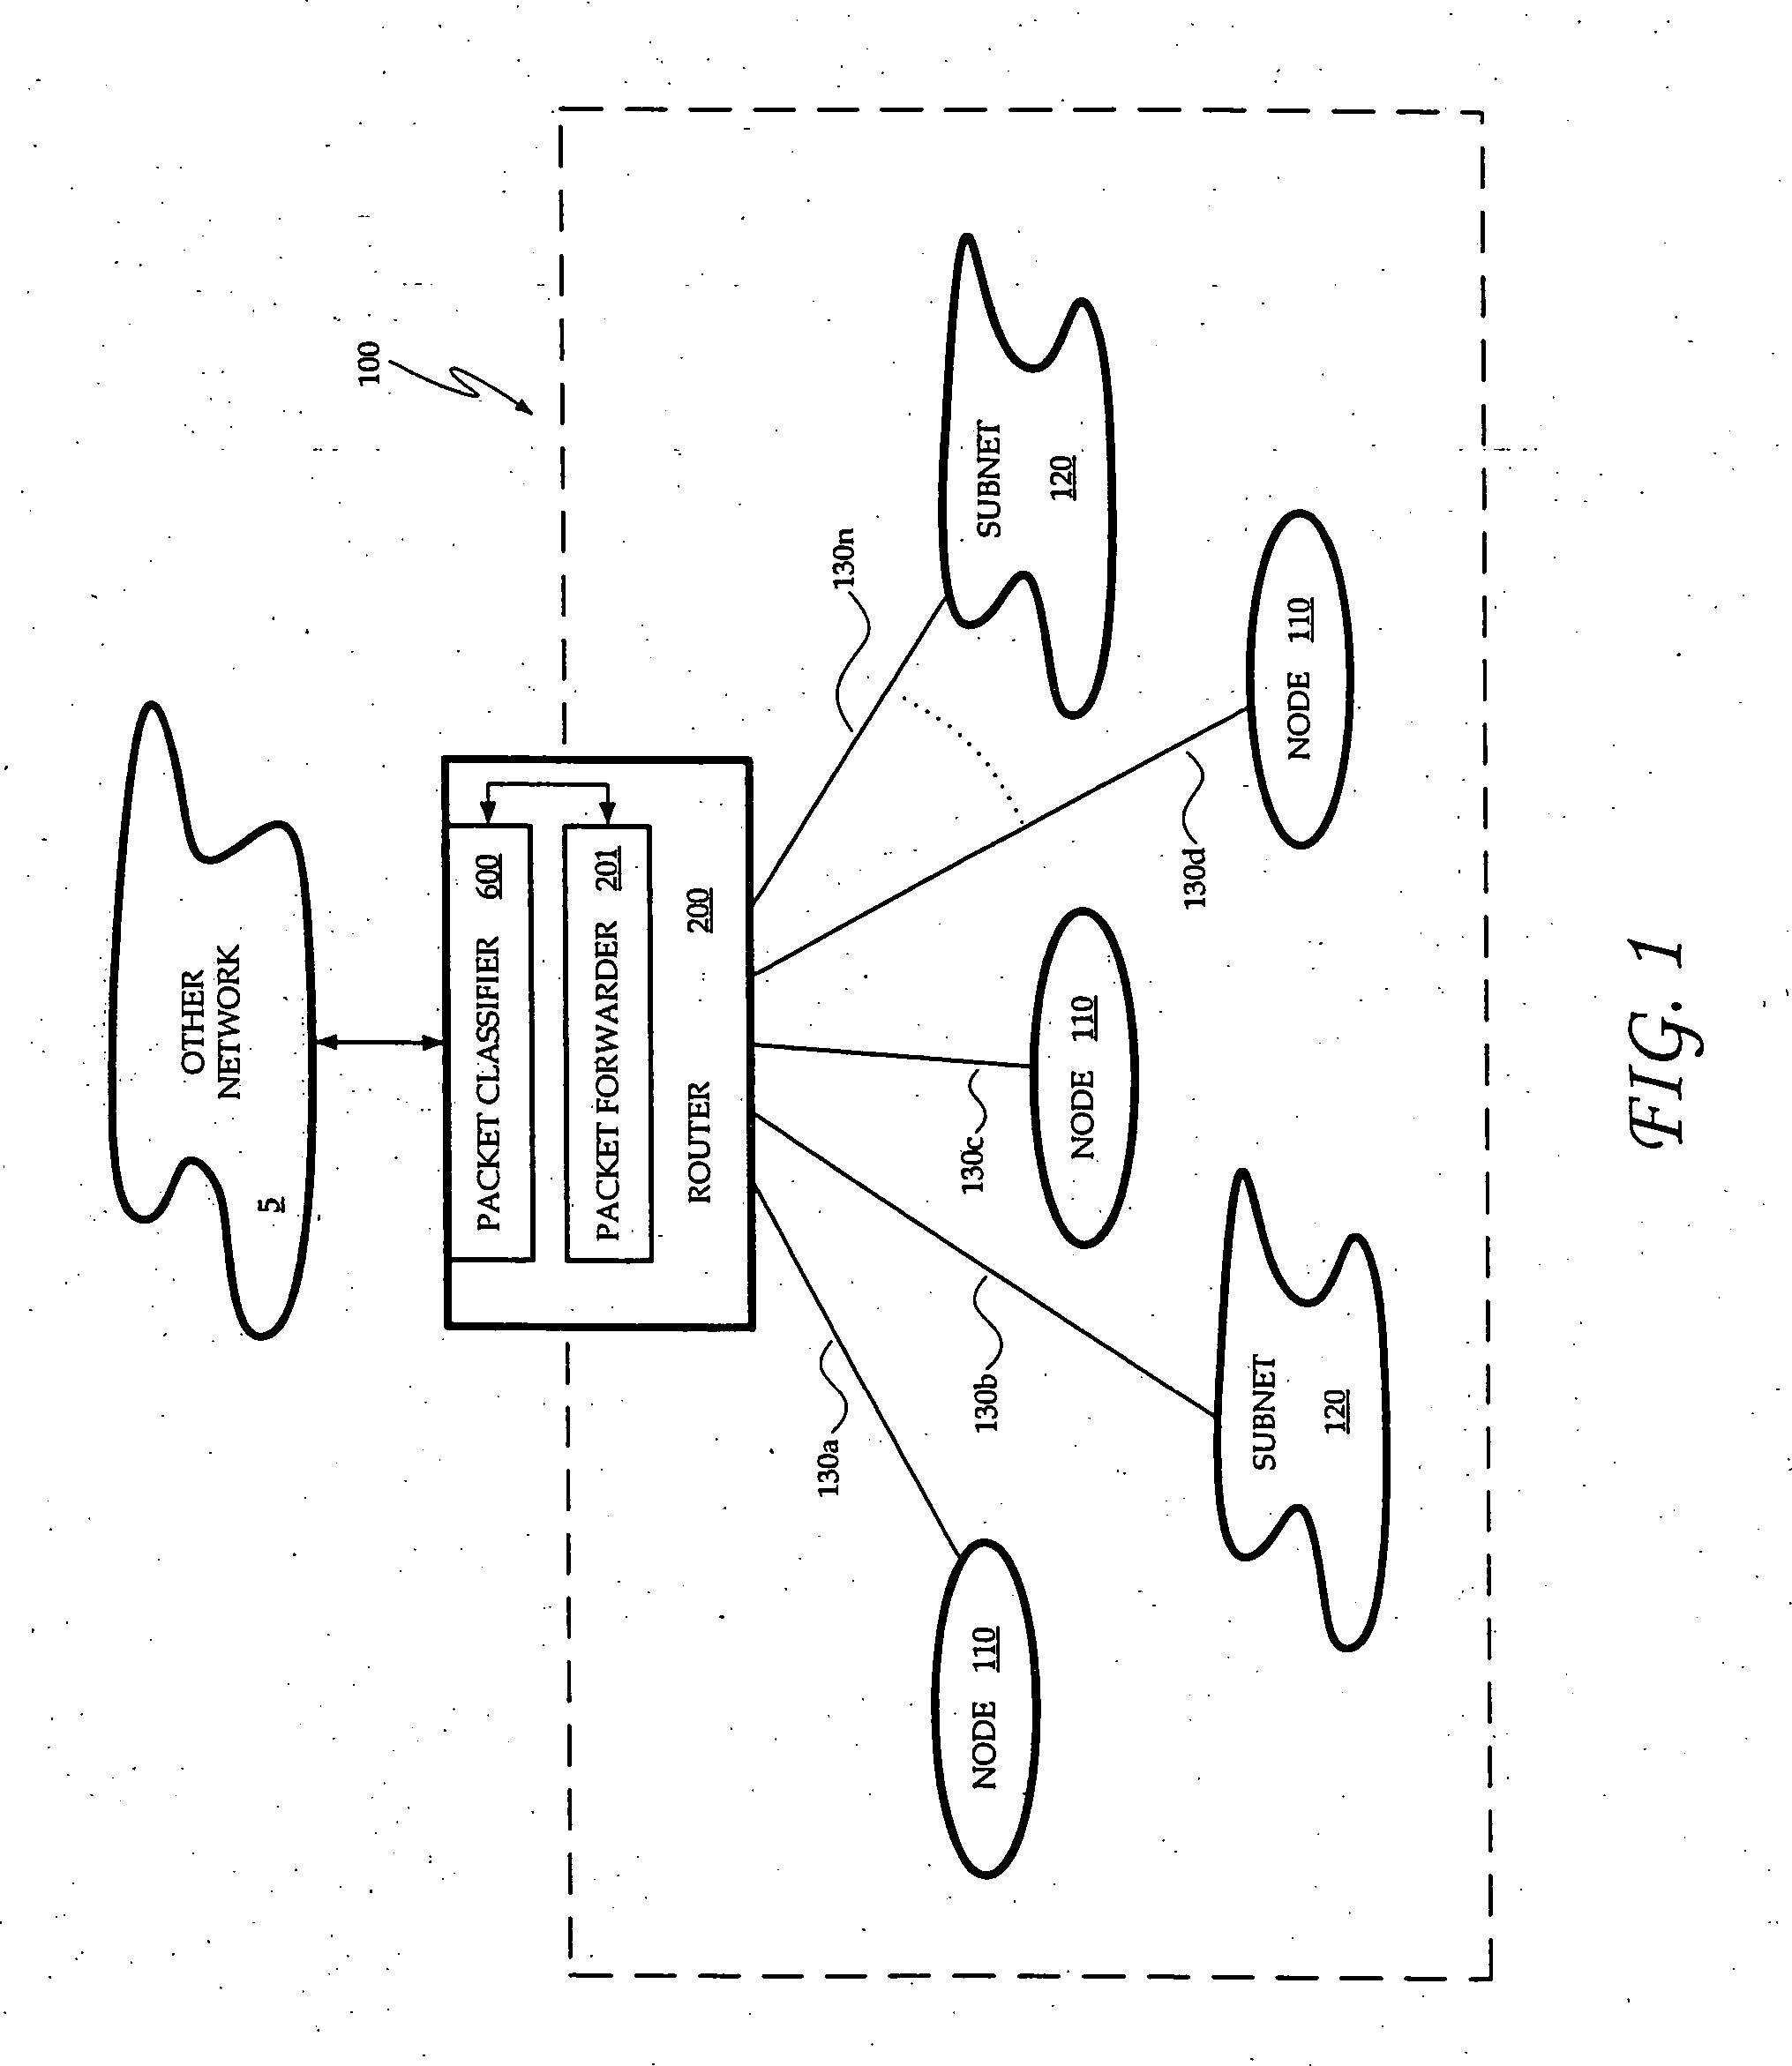 Apparatus and method for two-stage packet classification using most specific filter matching and transport level sharing